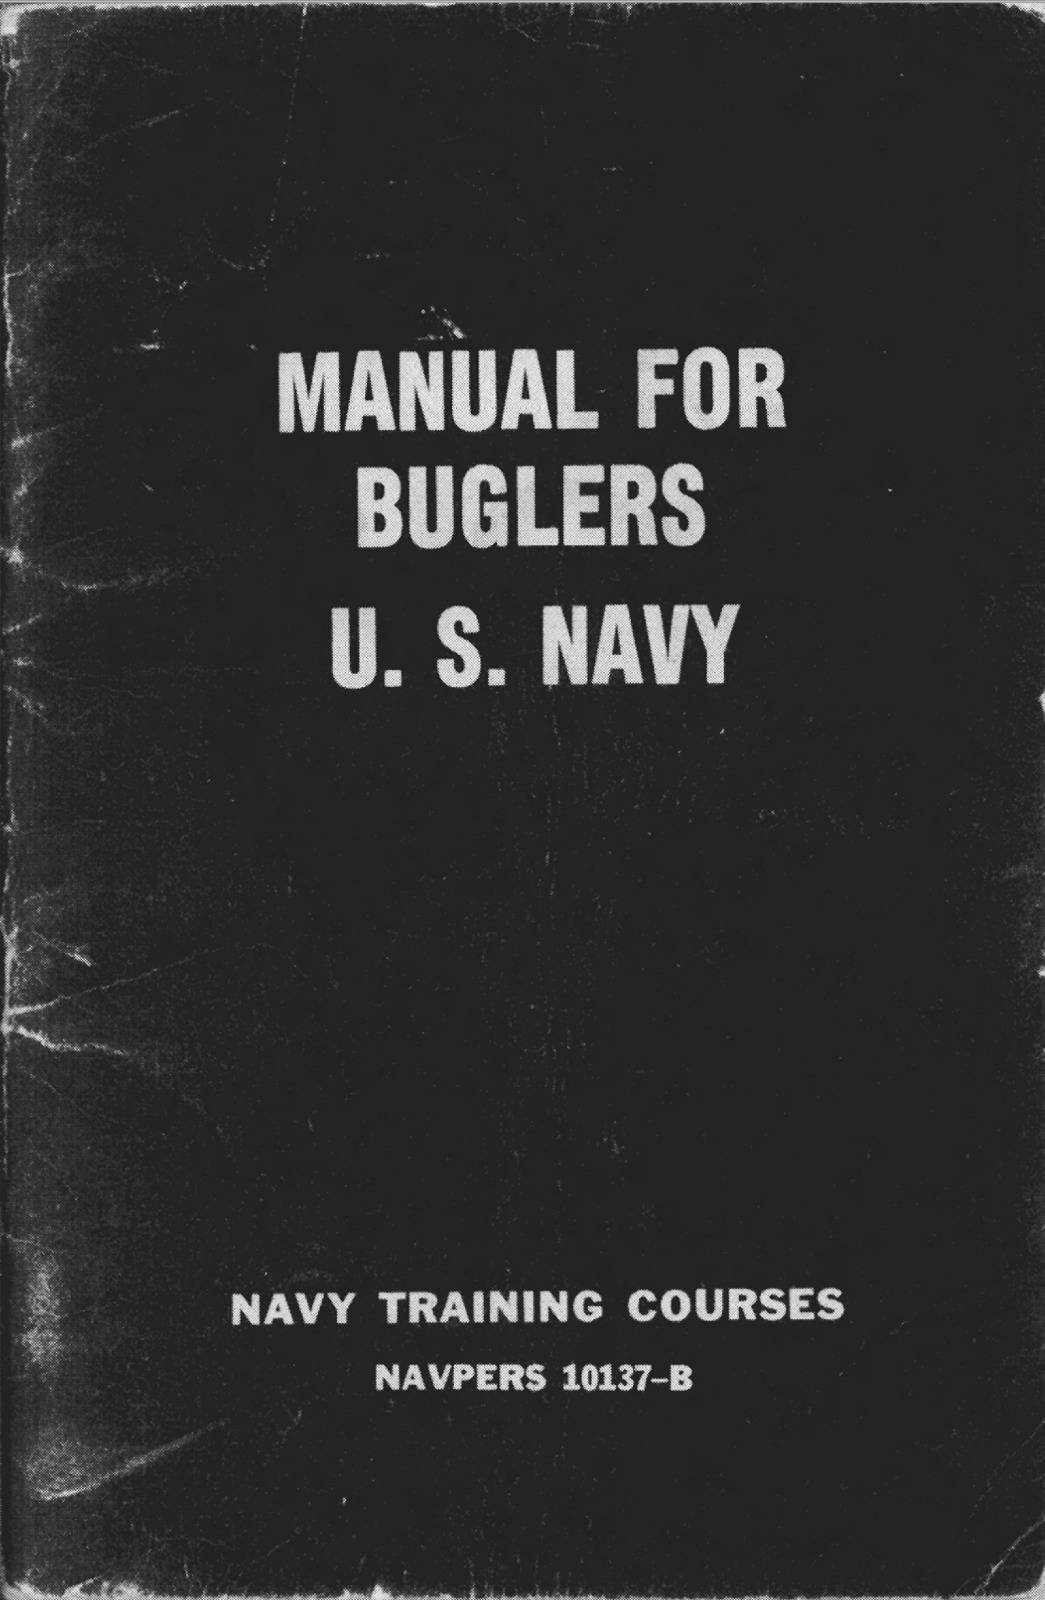 75 Page 1949 1953 Navy Manual For Buglers NAVPERS 10137-B Training Course on CD